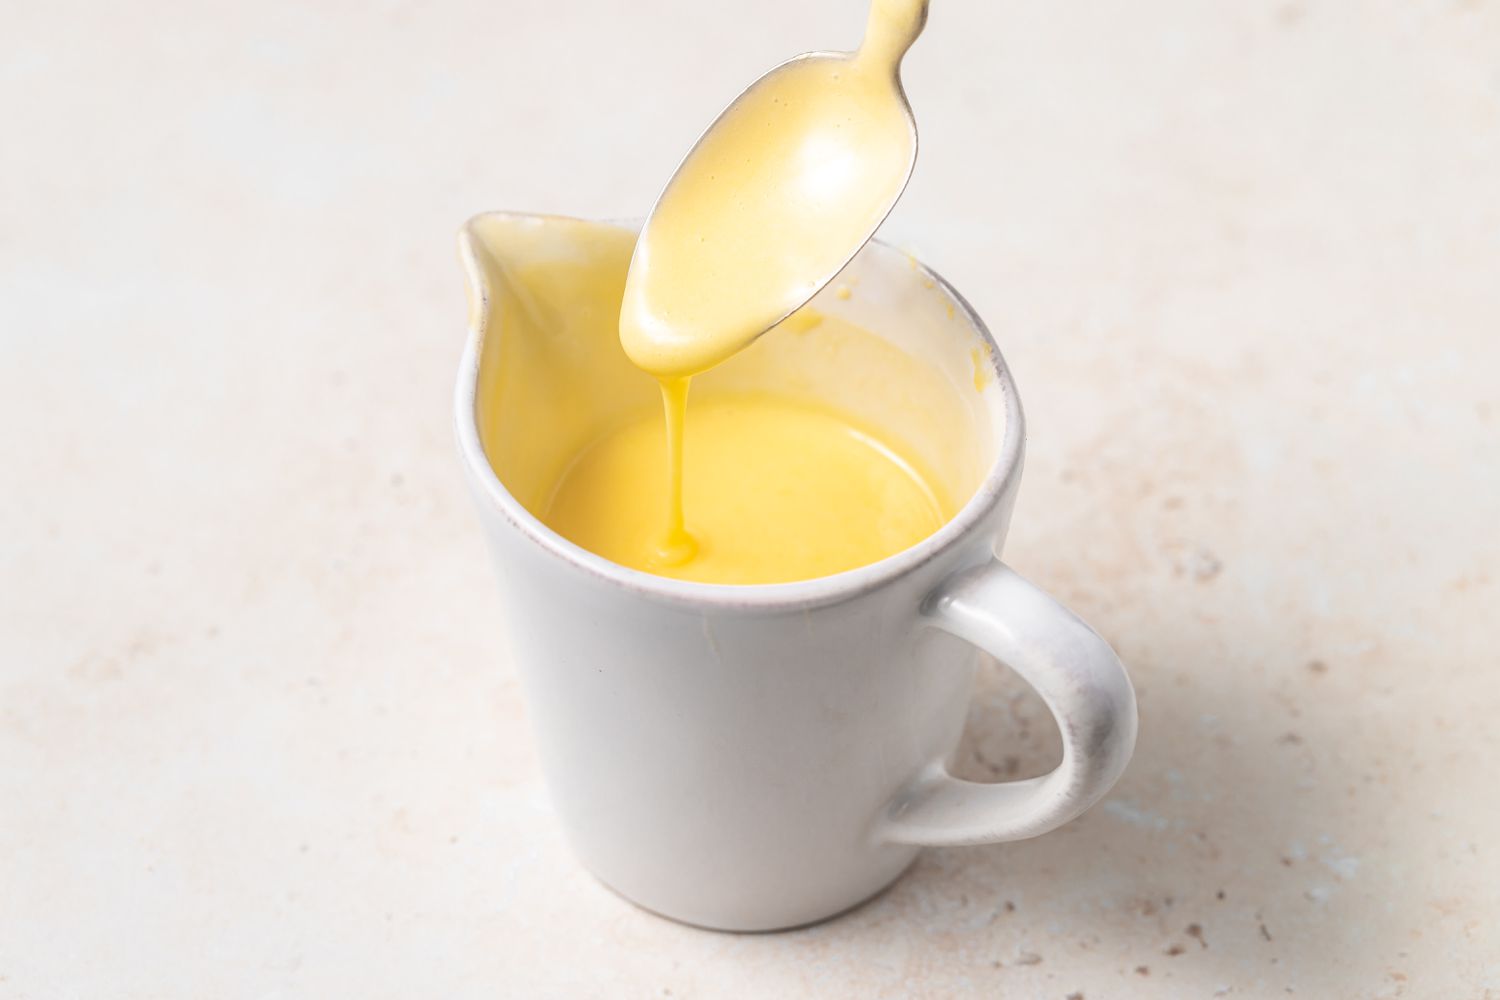 Blender Hollandaise Sauce in a spouted cup with a spoon letting the sauce drip back into the dish.